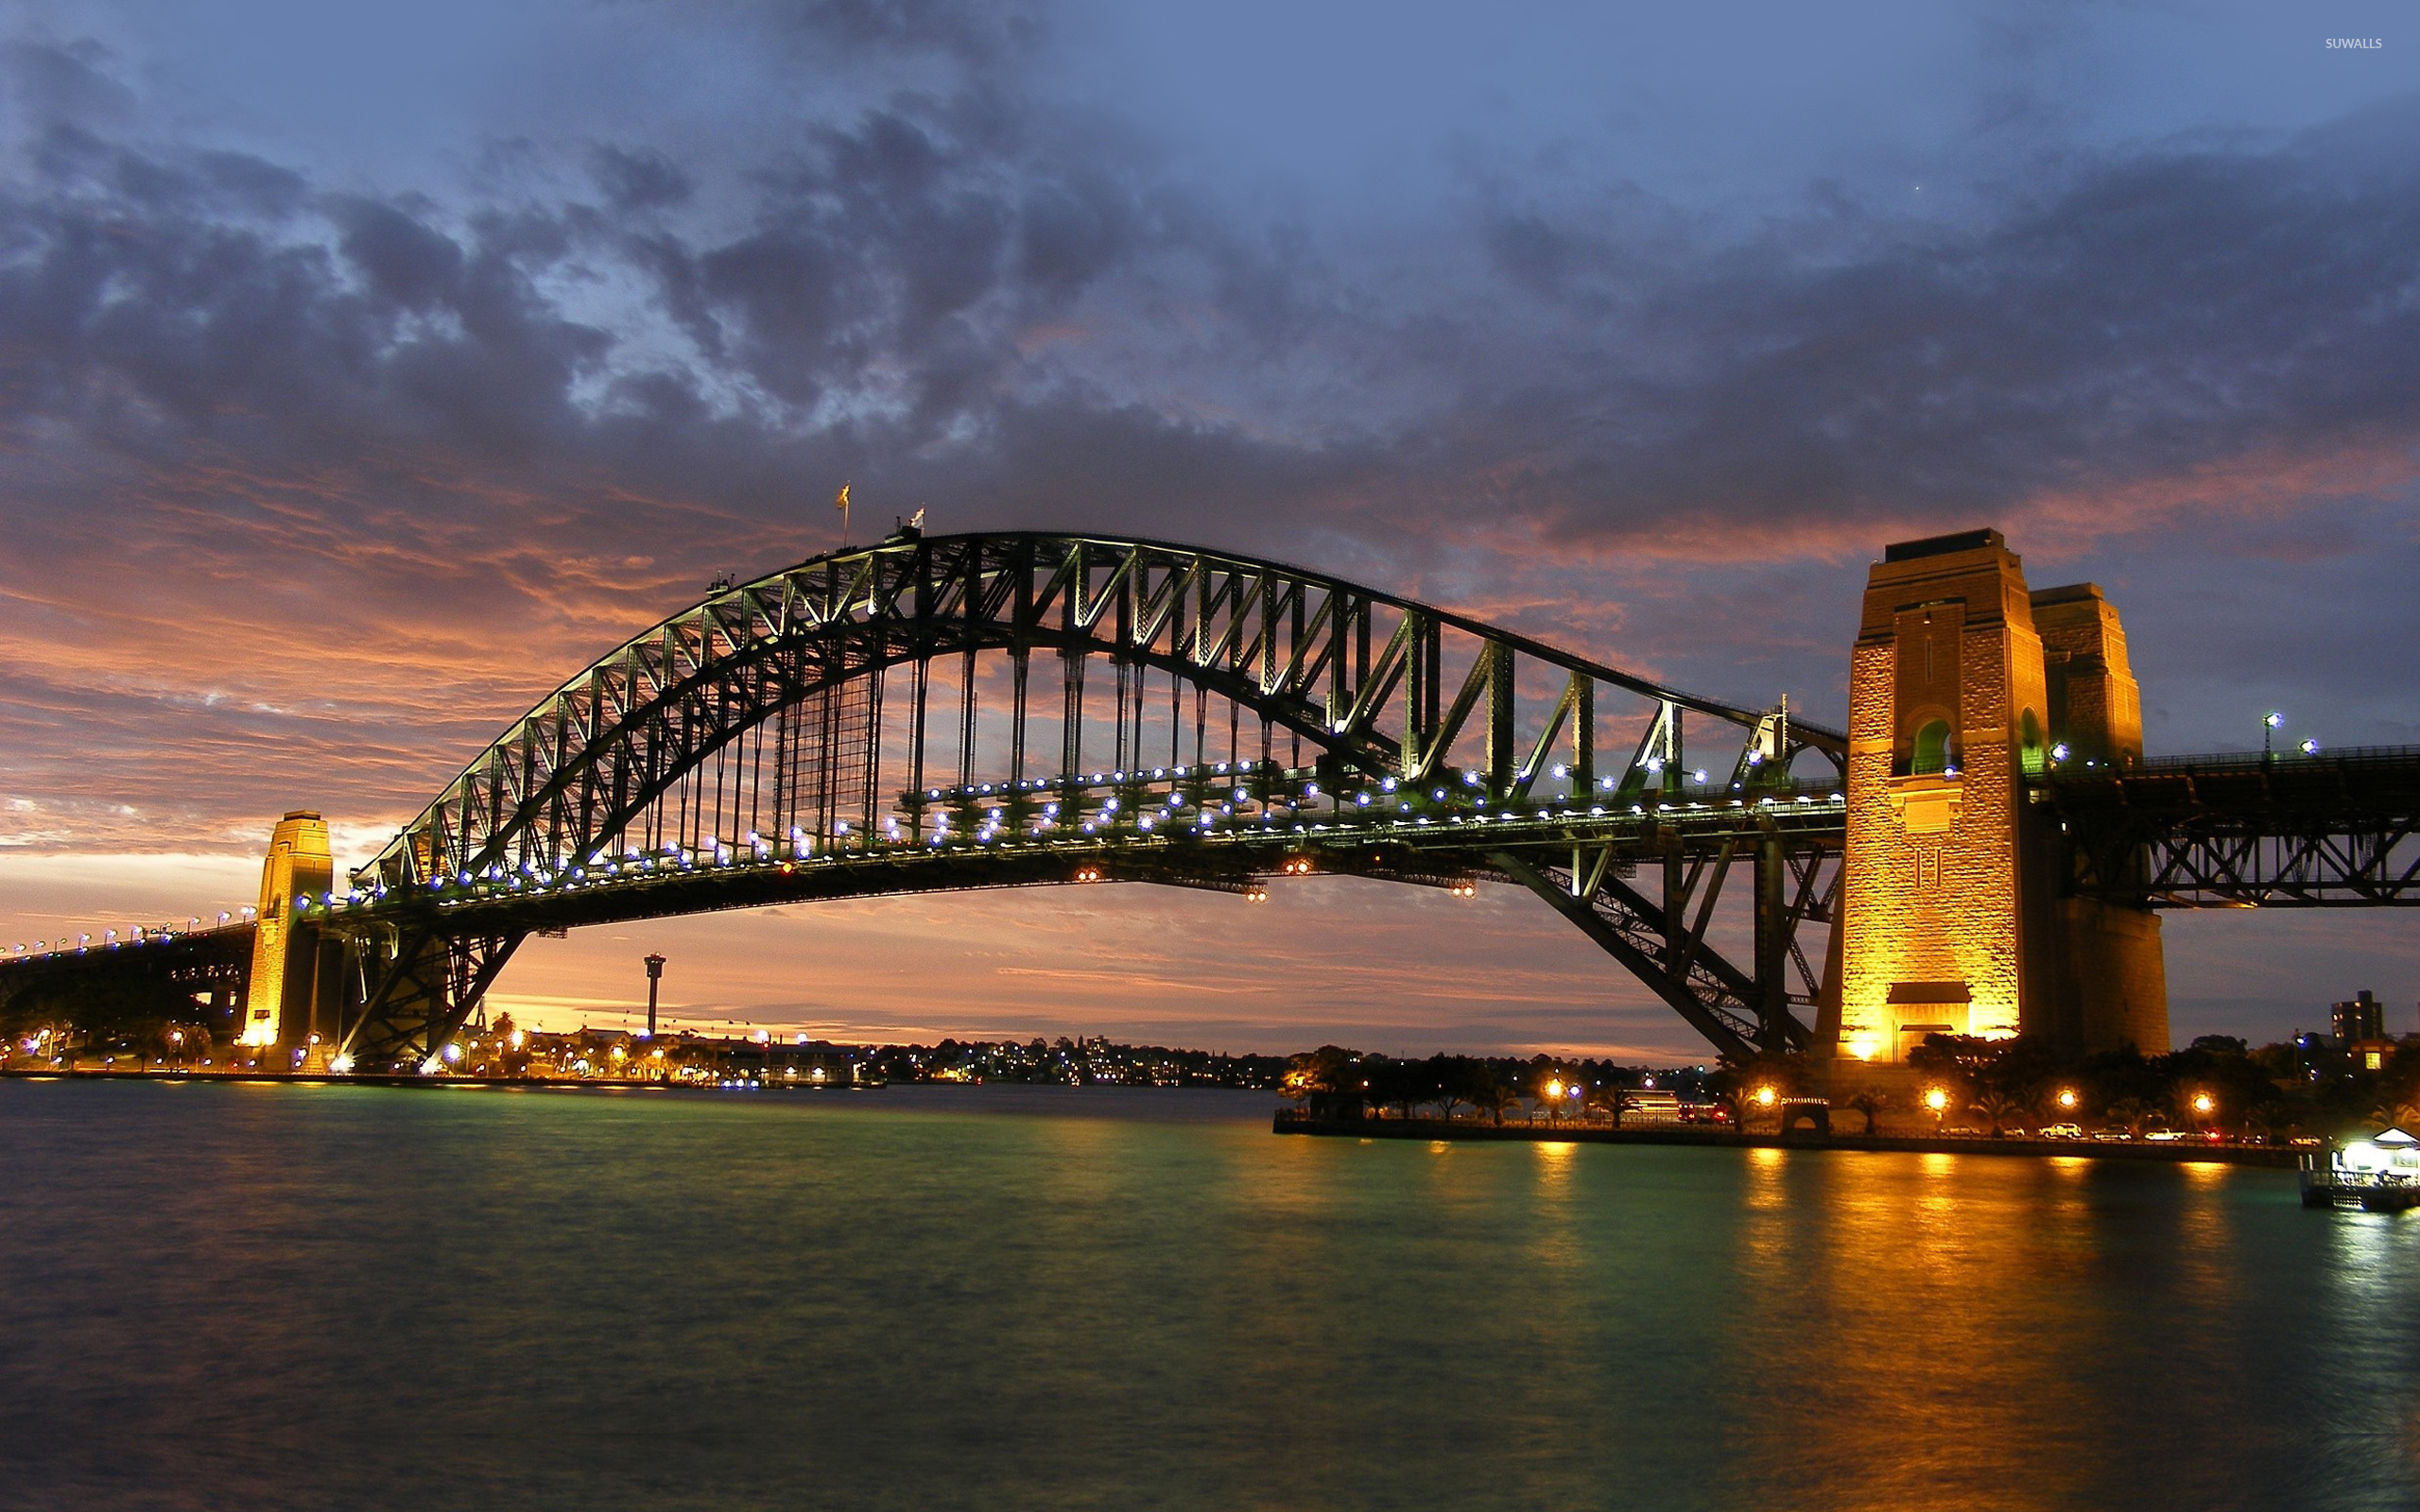 Sydney: Harbour Bridge, The city was founded in 1788 as a penal colony. 2560x1600 HD Wallpaper.